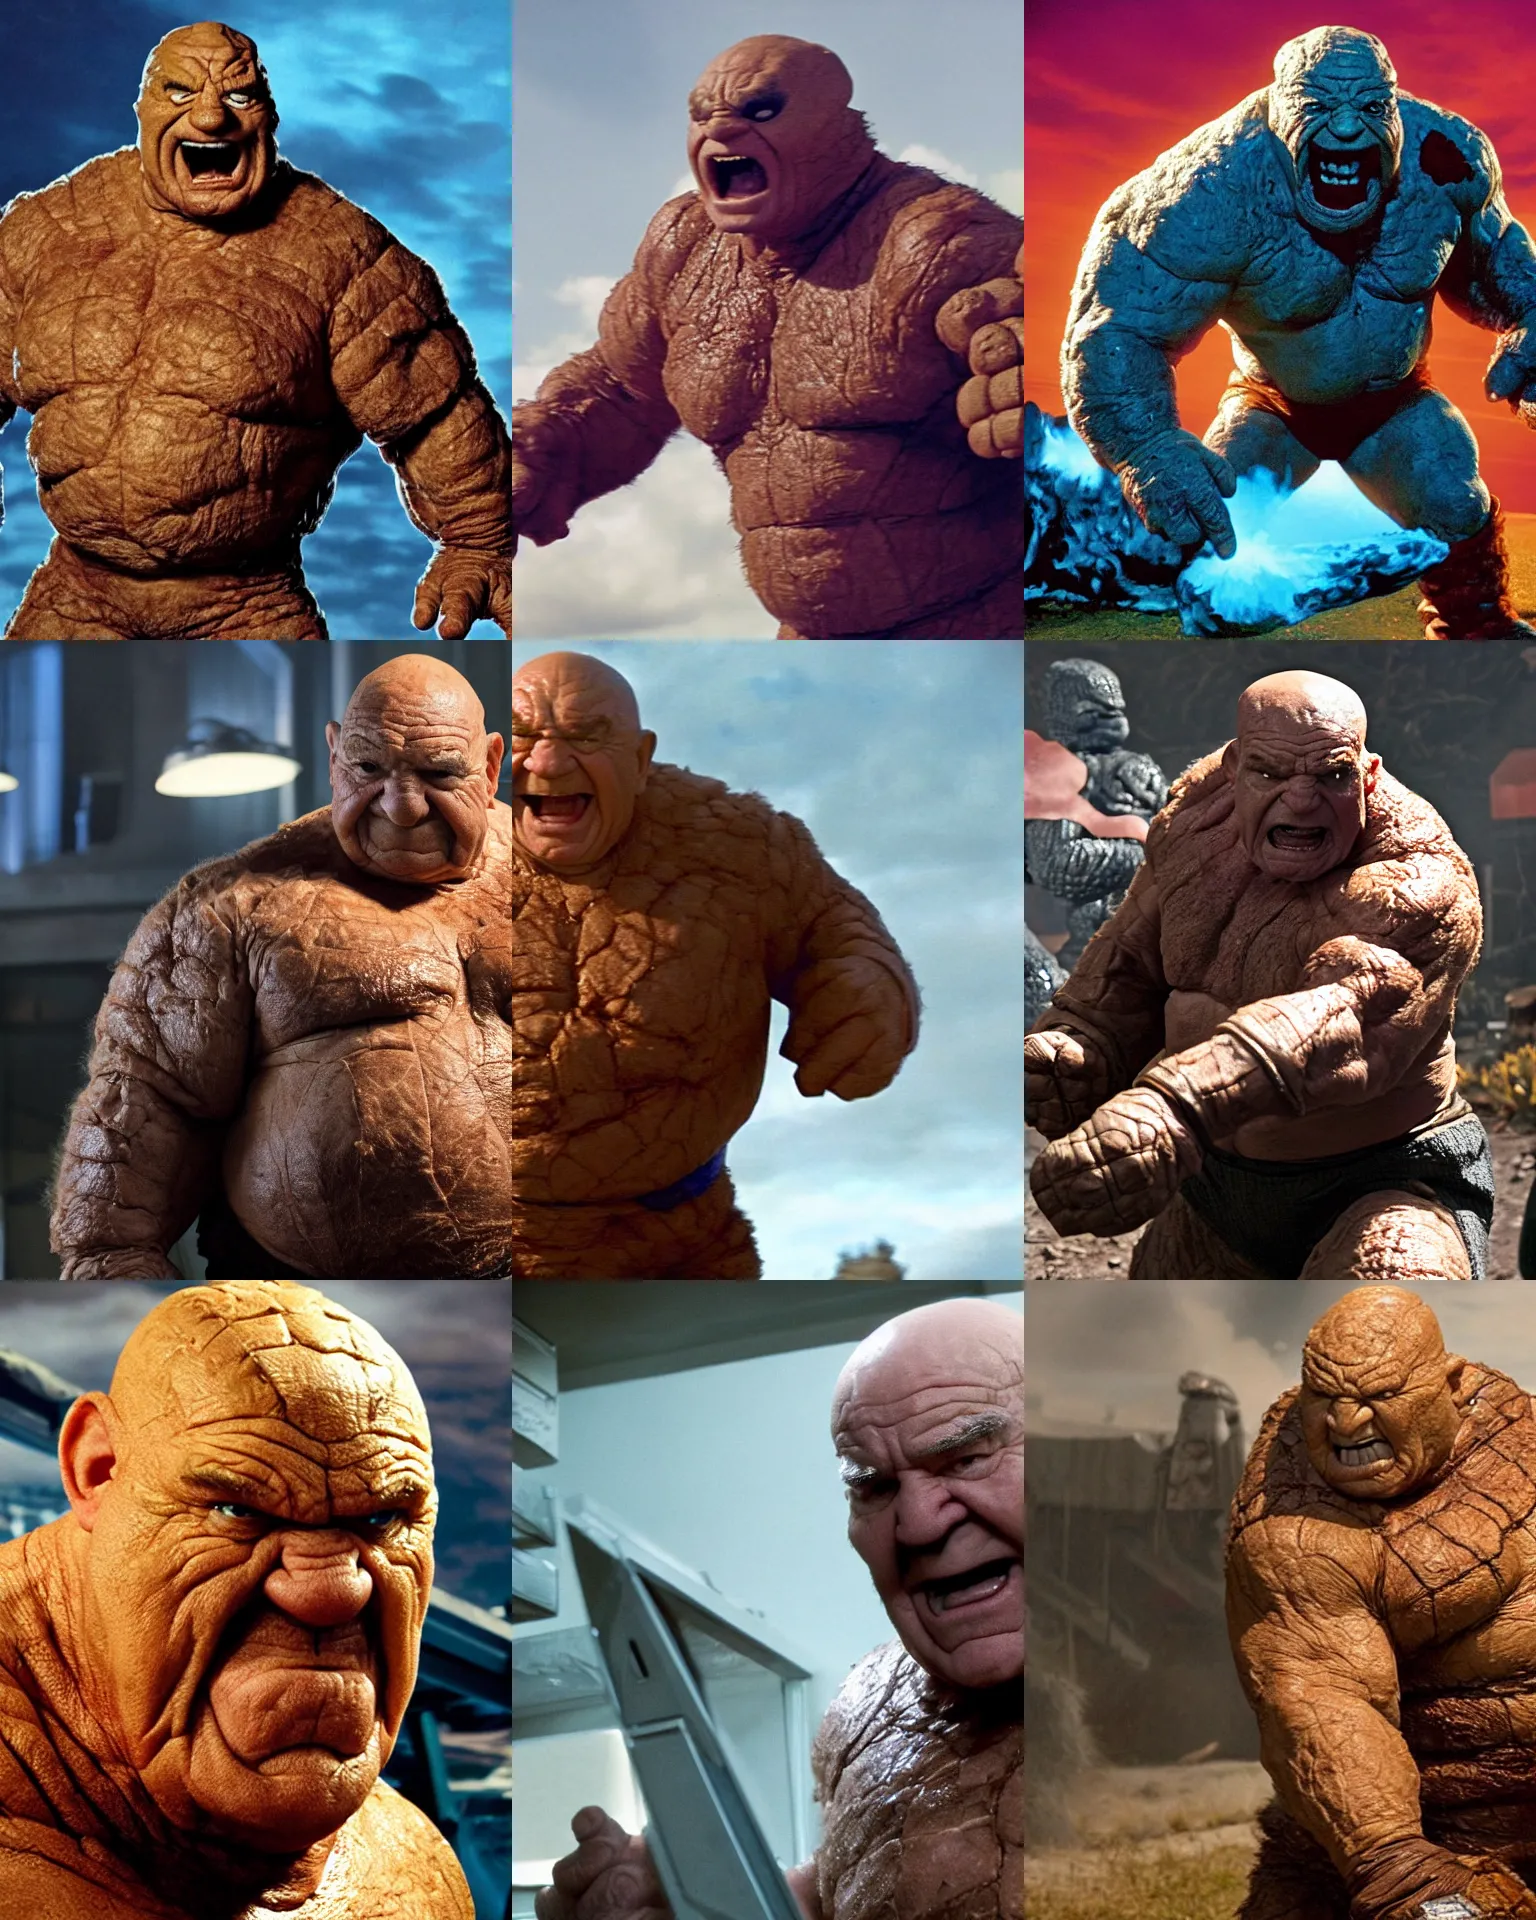 Prompt: Ed Asner starring as Ben Grimm, The Thing from The Fantastic Four Movie, battles the Thanos, Color, Modern